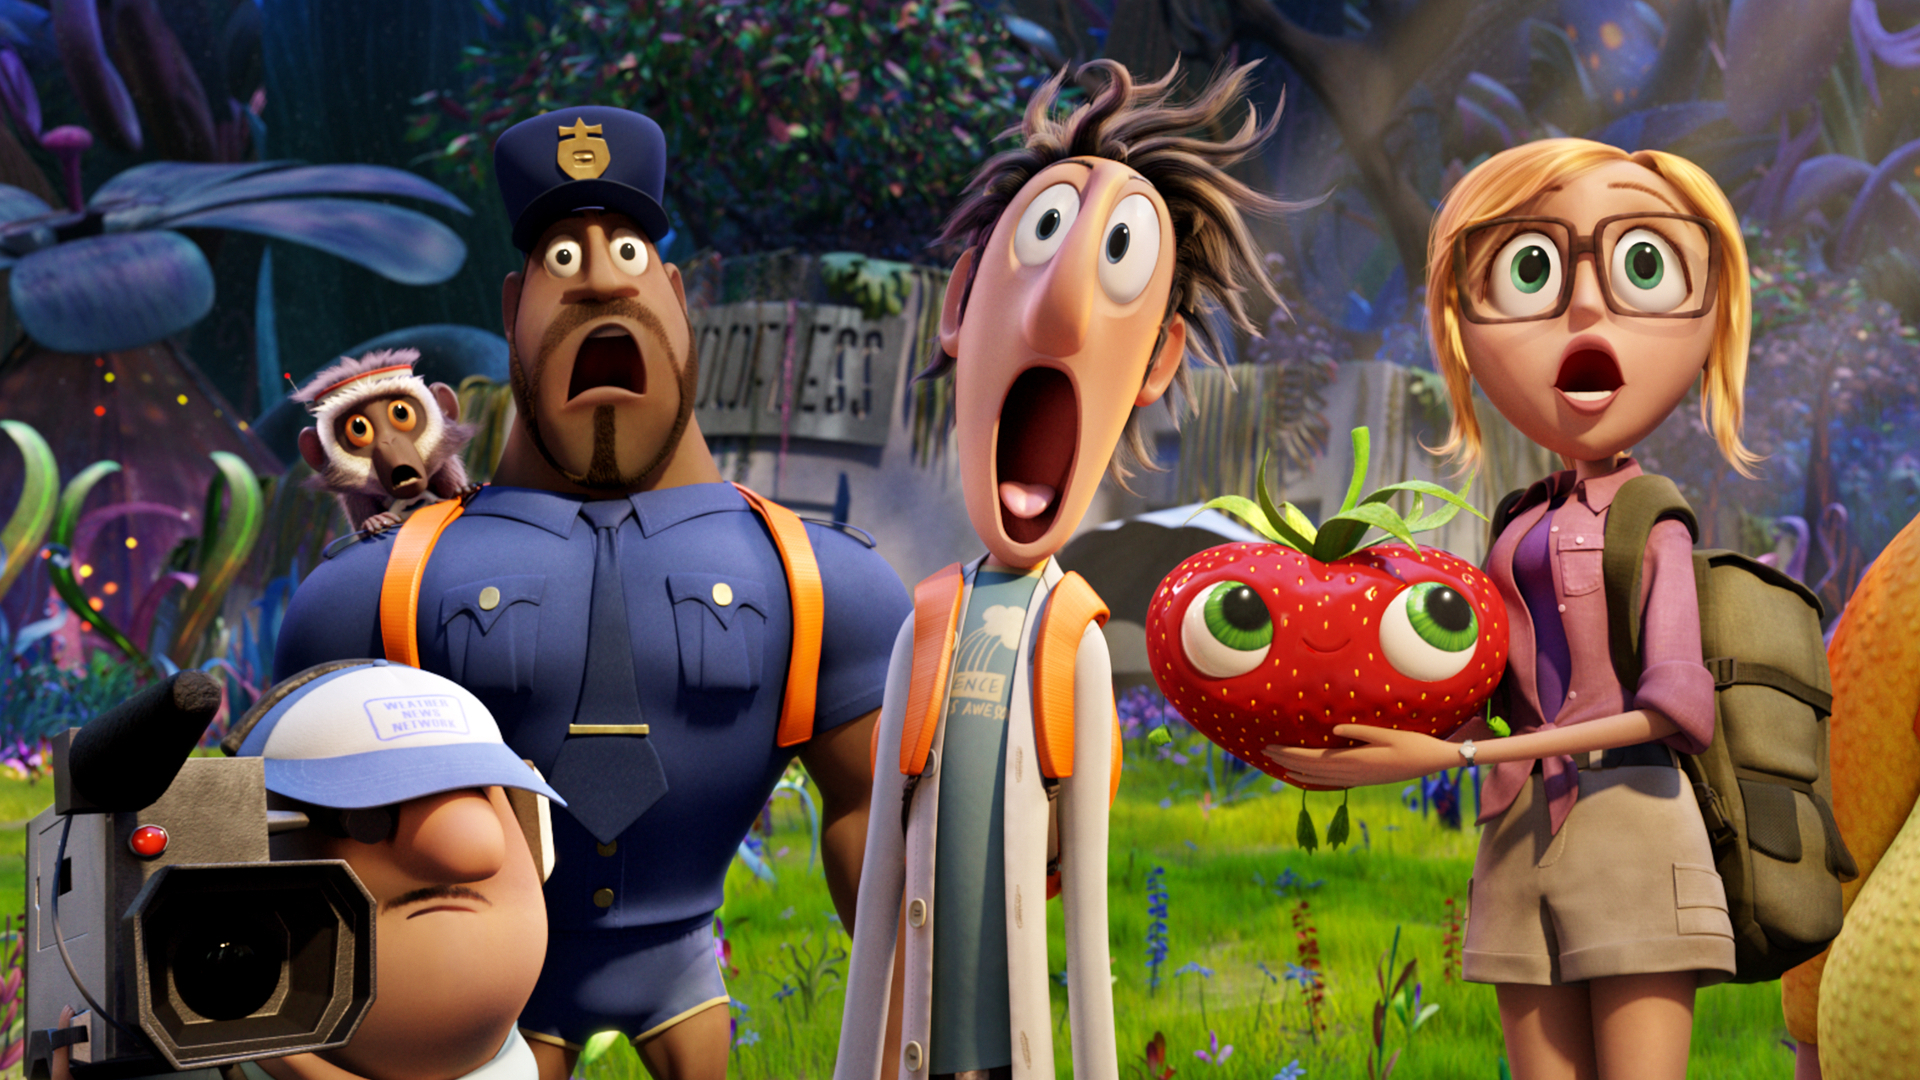 Cloudy With A Chance Of Meatballs Wallpapers